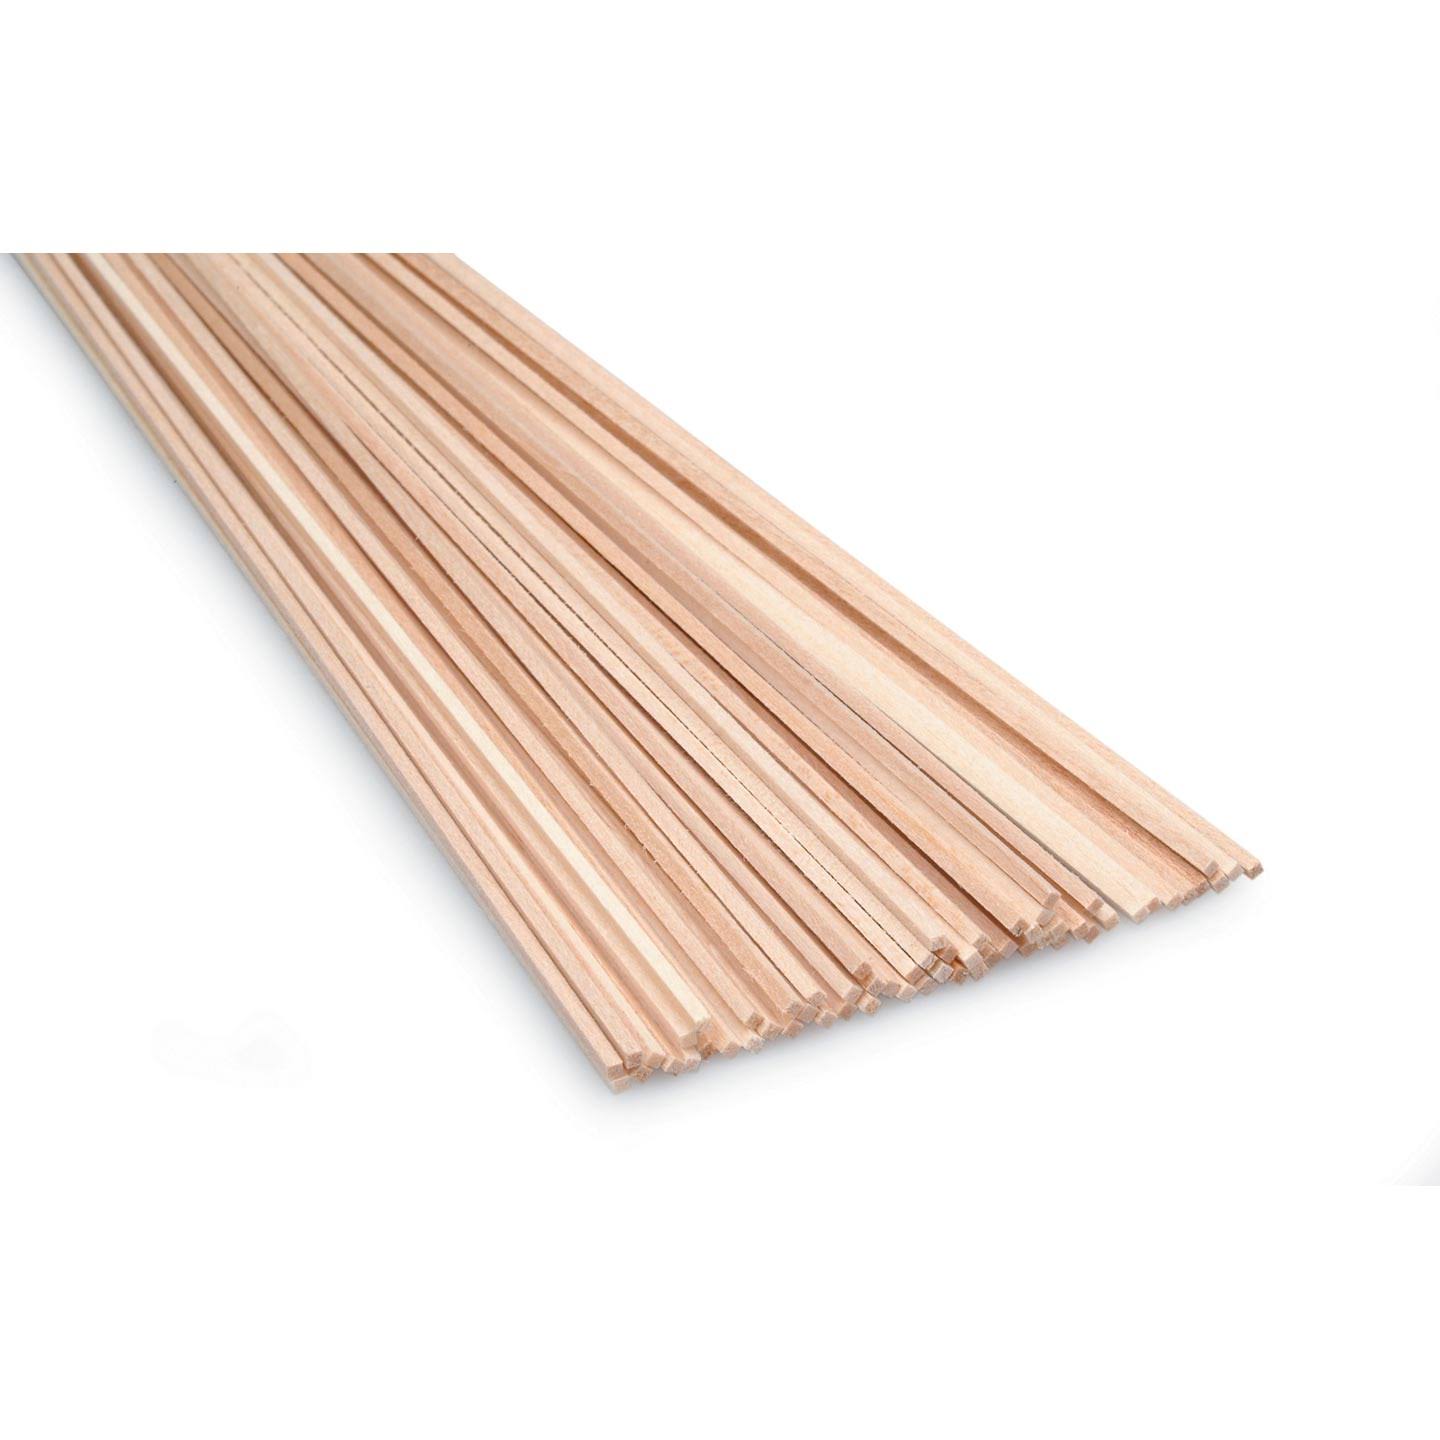 Midwest Products 4022 0.10 x 1.10 x 24 in Basswood Pack of 60